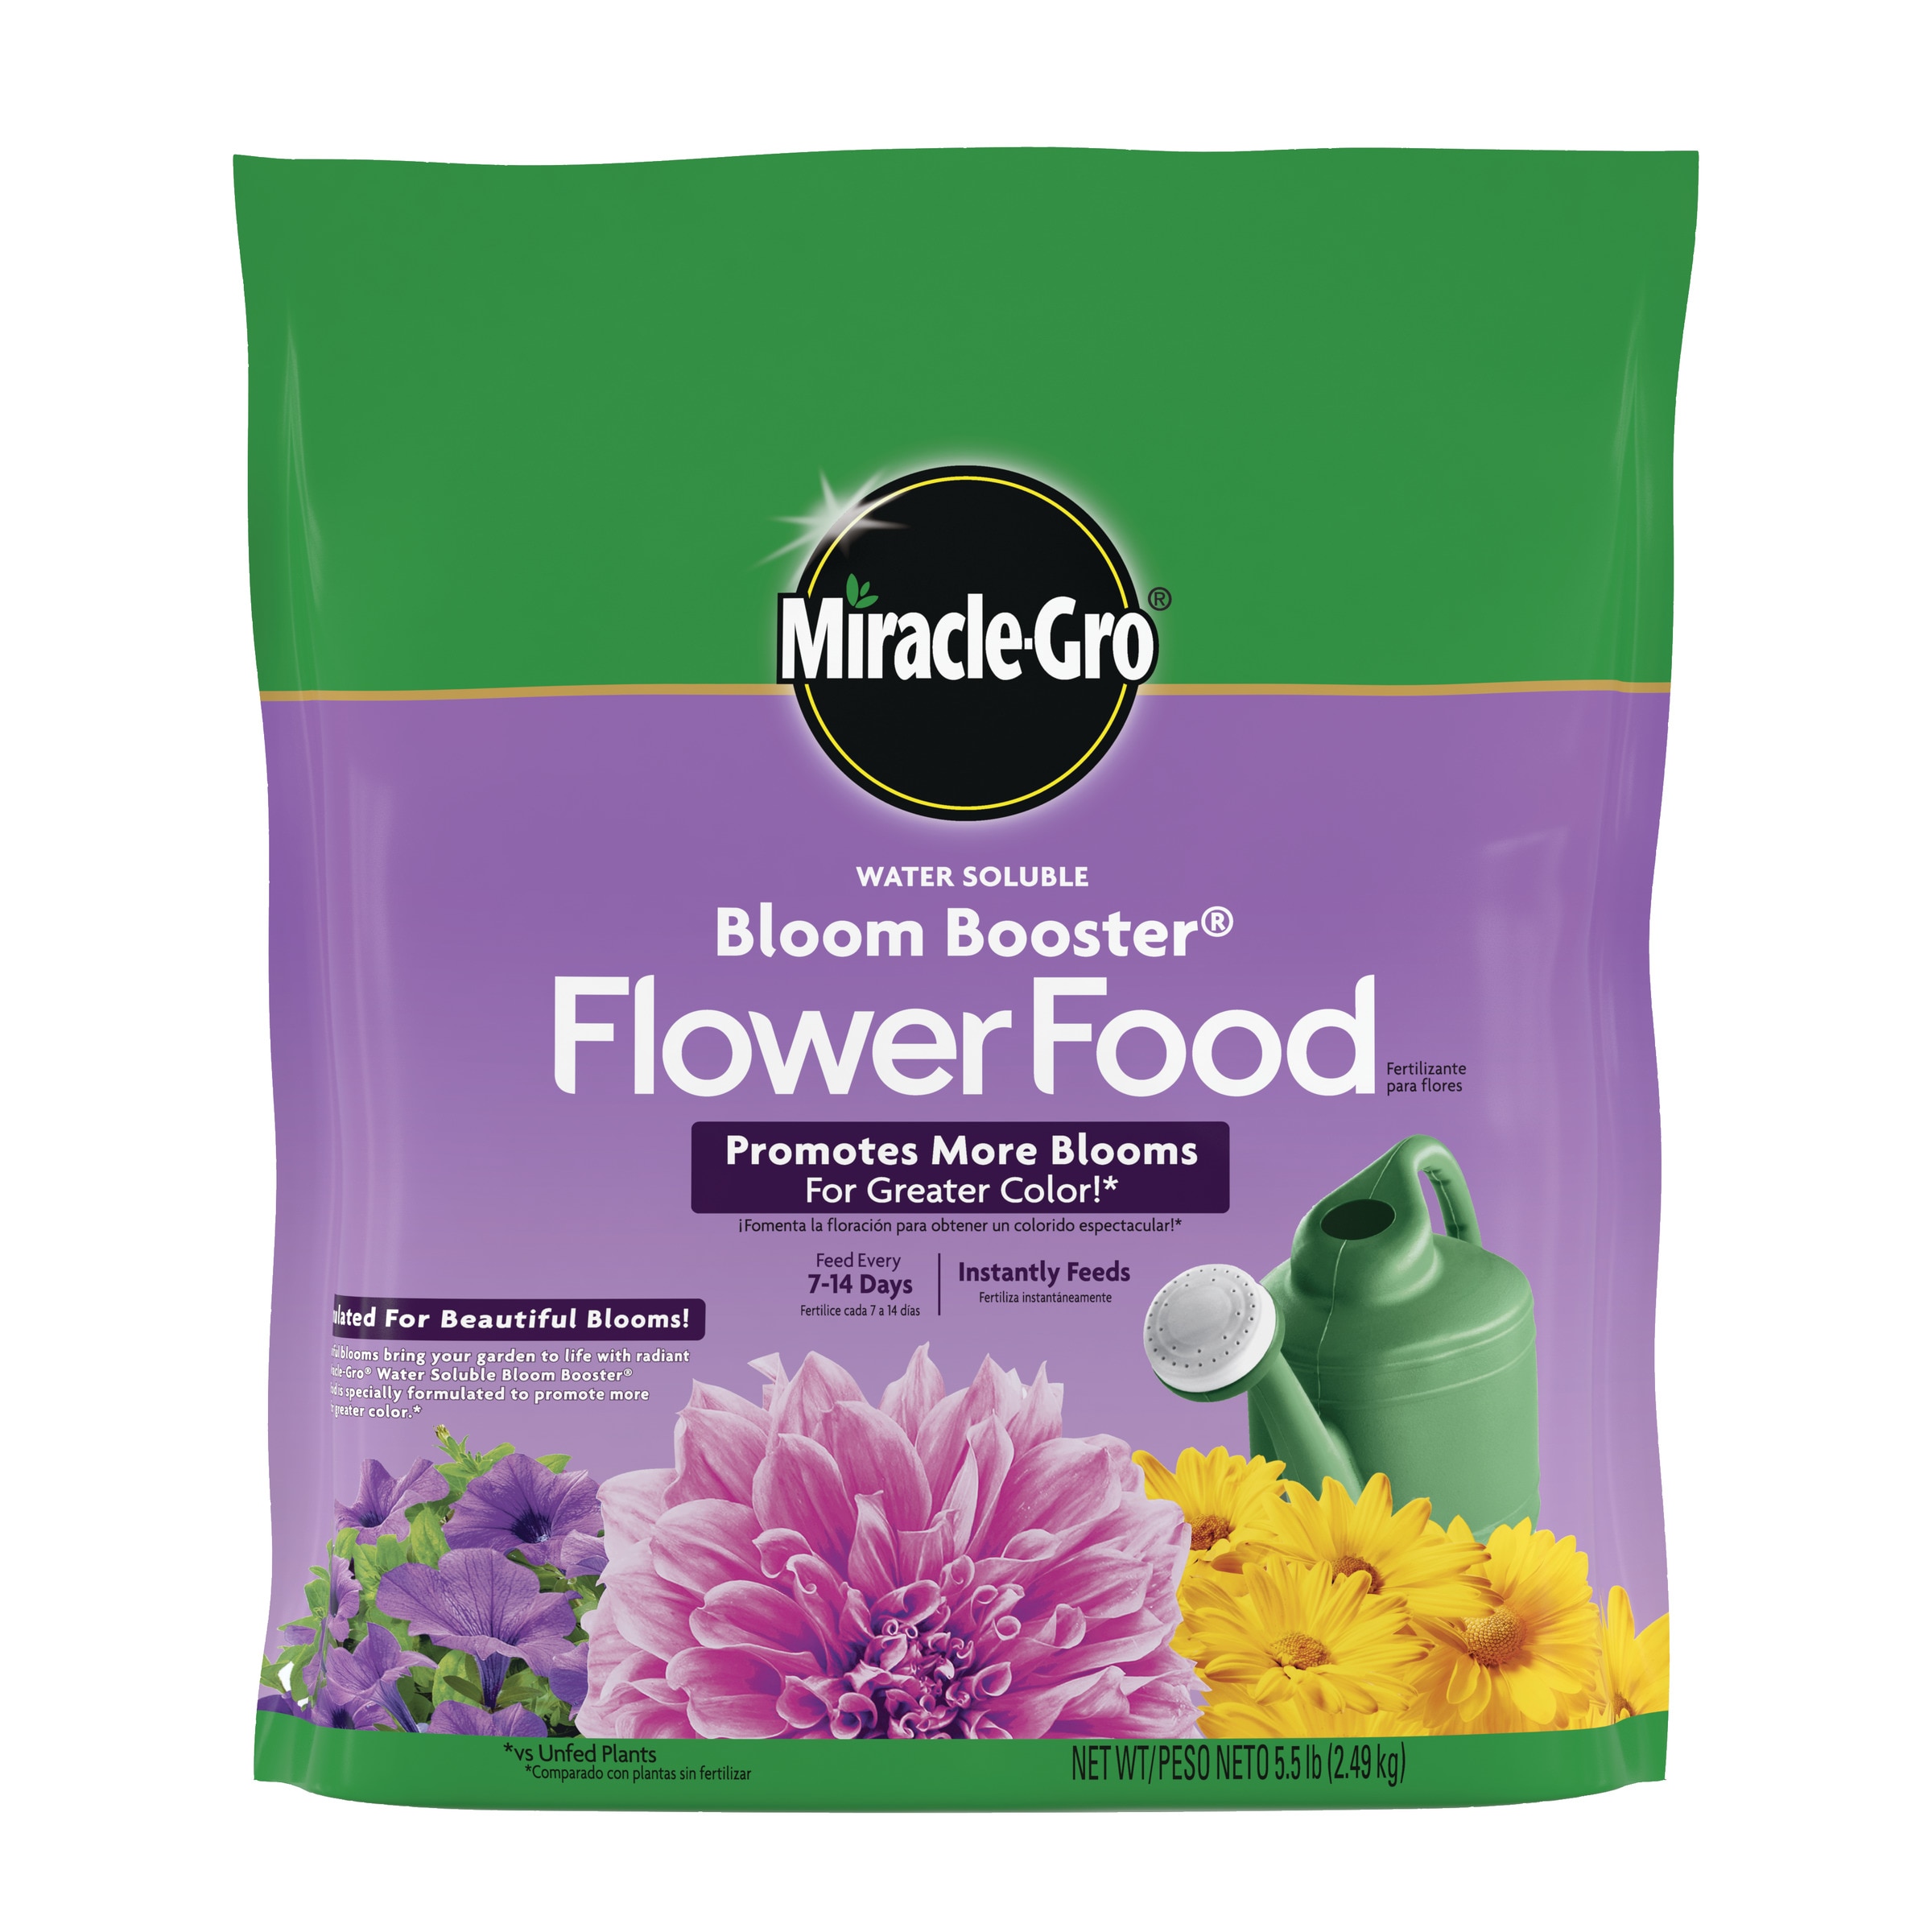 Miracle-Gro Water Soluble Bloom Booster 5.5-lb Water-soluble